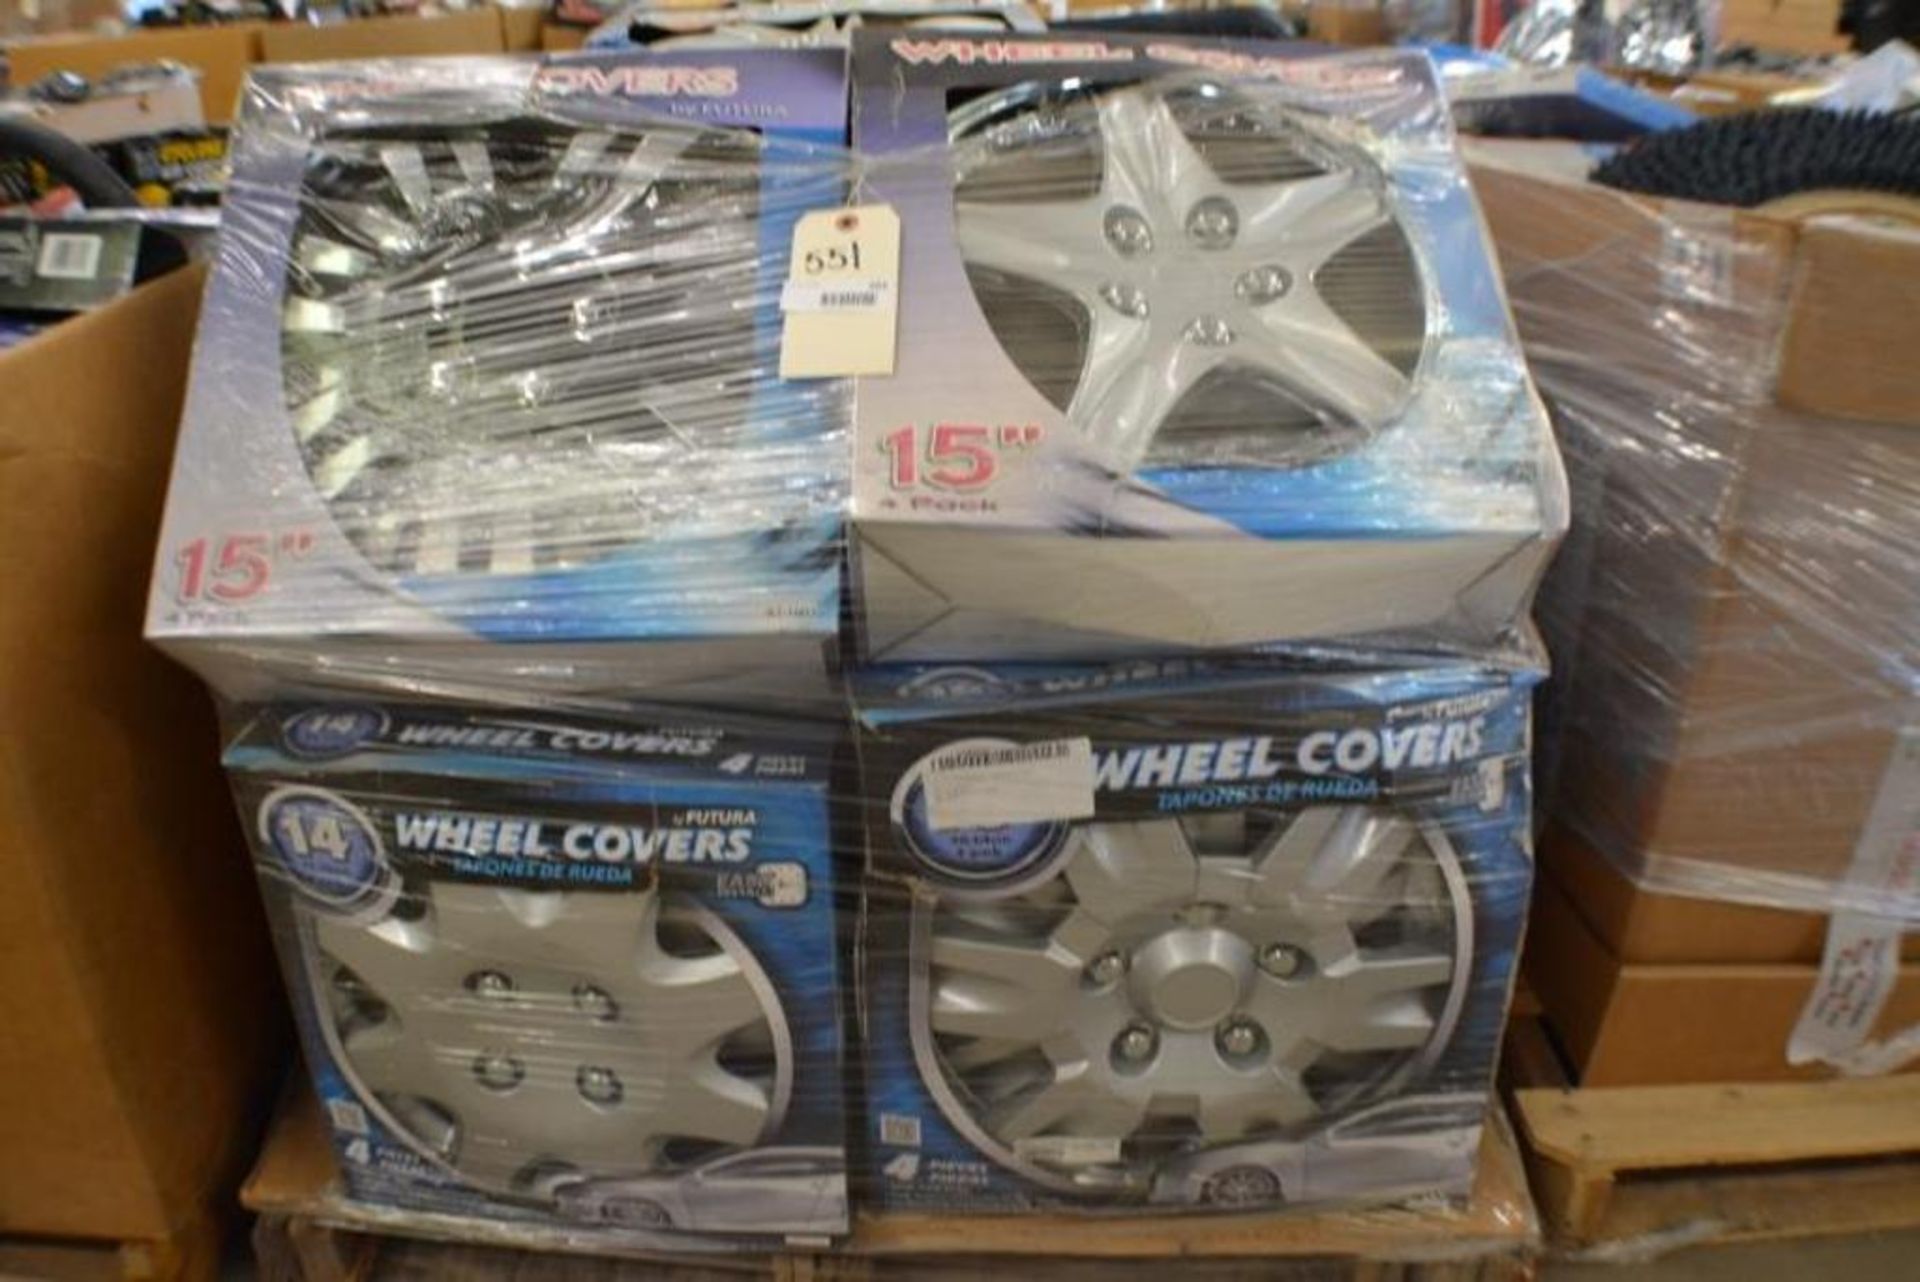 Wheel Covers Assorted Sizes. Contents of Gaylord - Image 2 of 6